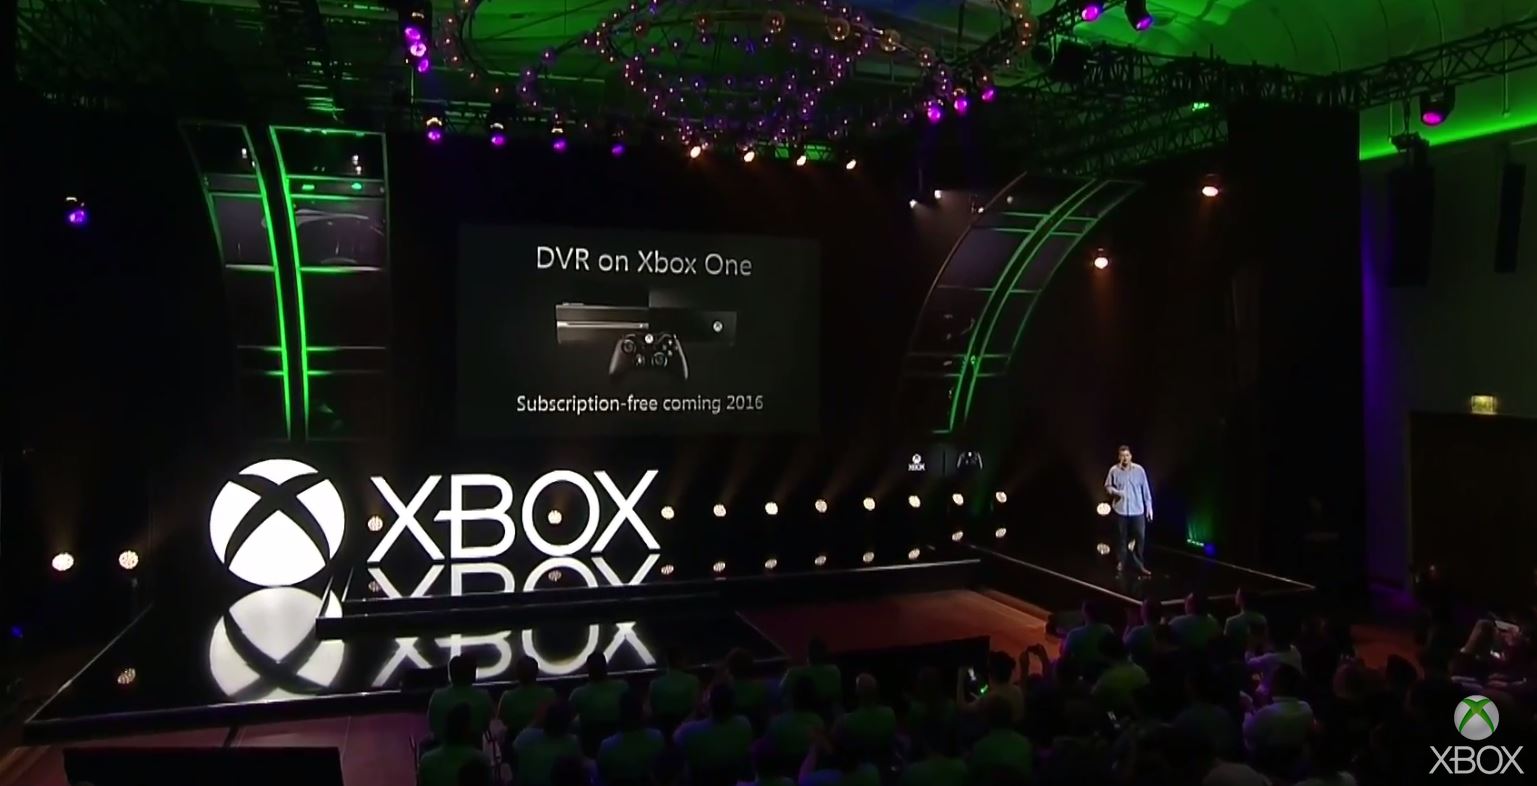 Microsoft putting its TV DVR for Xbox One development on hold